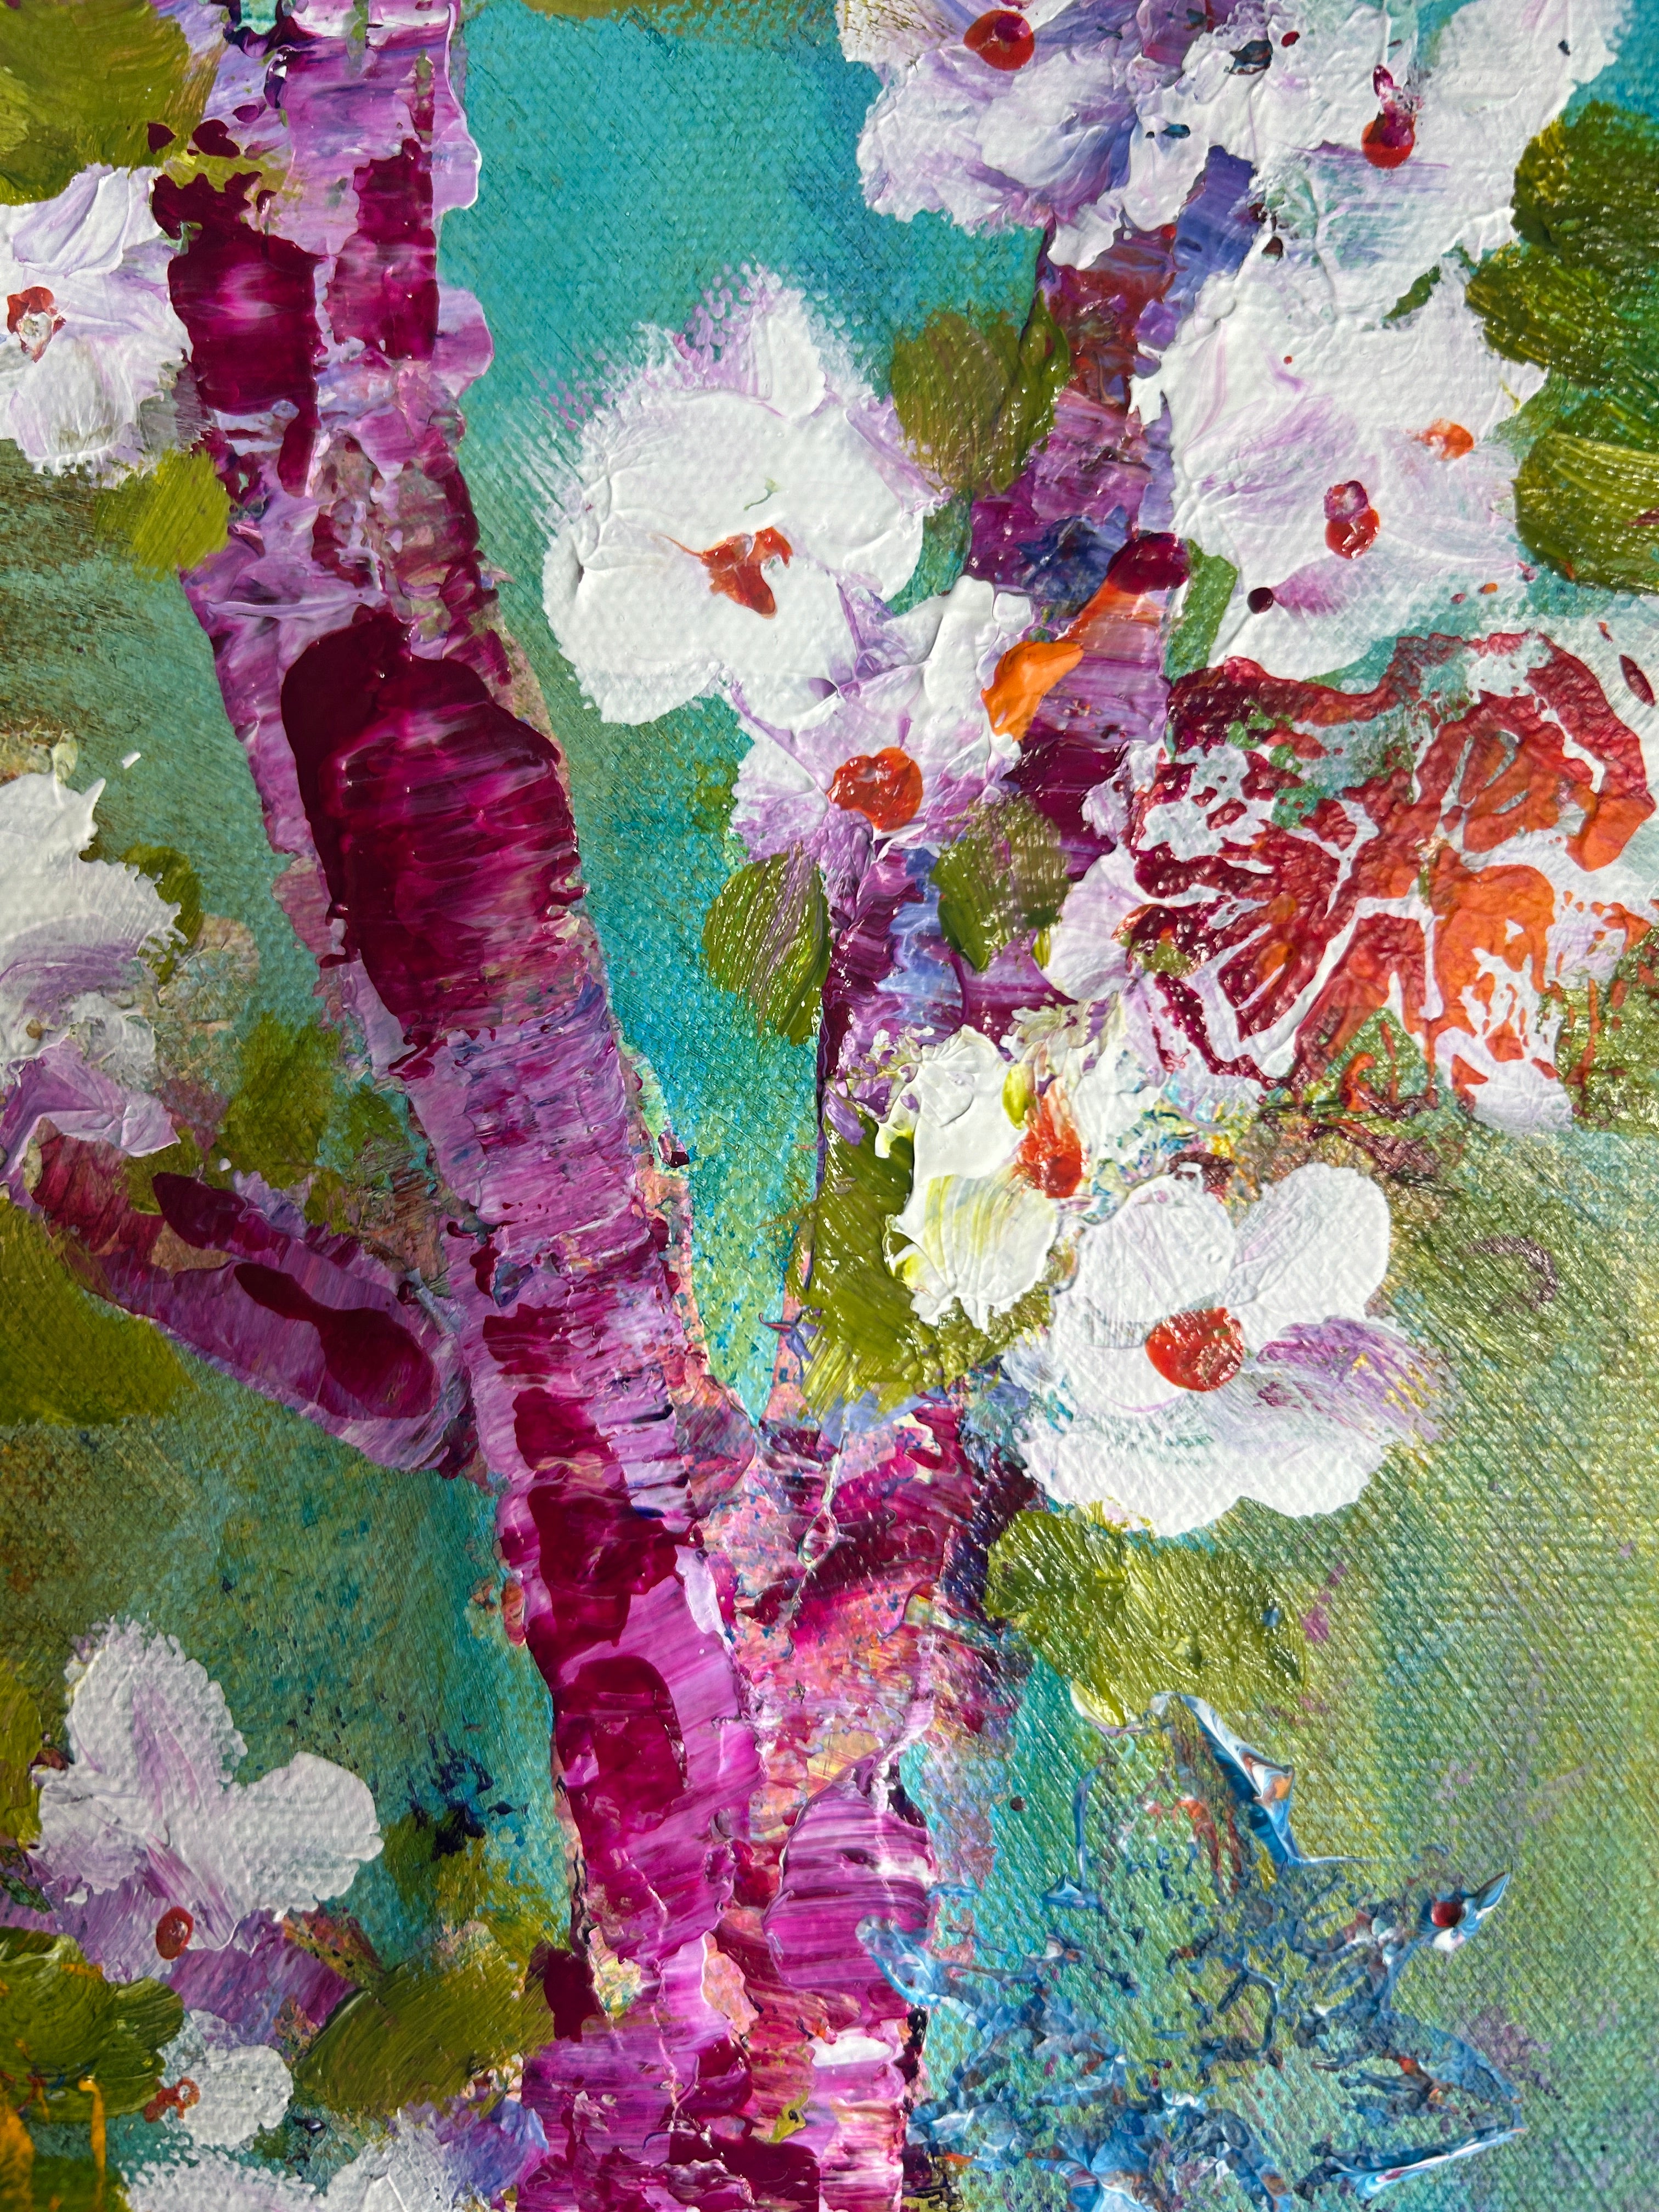 Detail - Original 12 by 24 inch acrylic painting on a 1.5 inch deep canvas by Ottawa-based artist Mireille Laroche